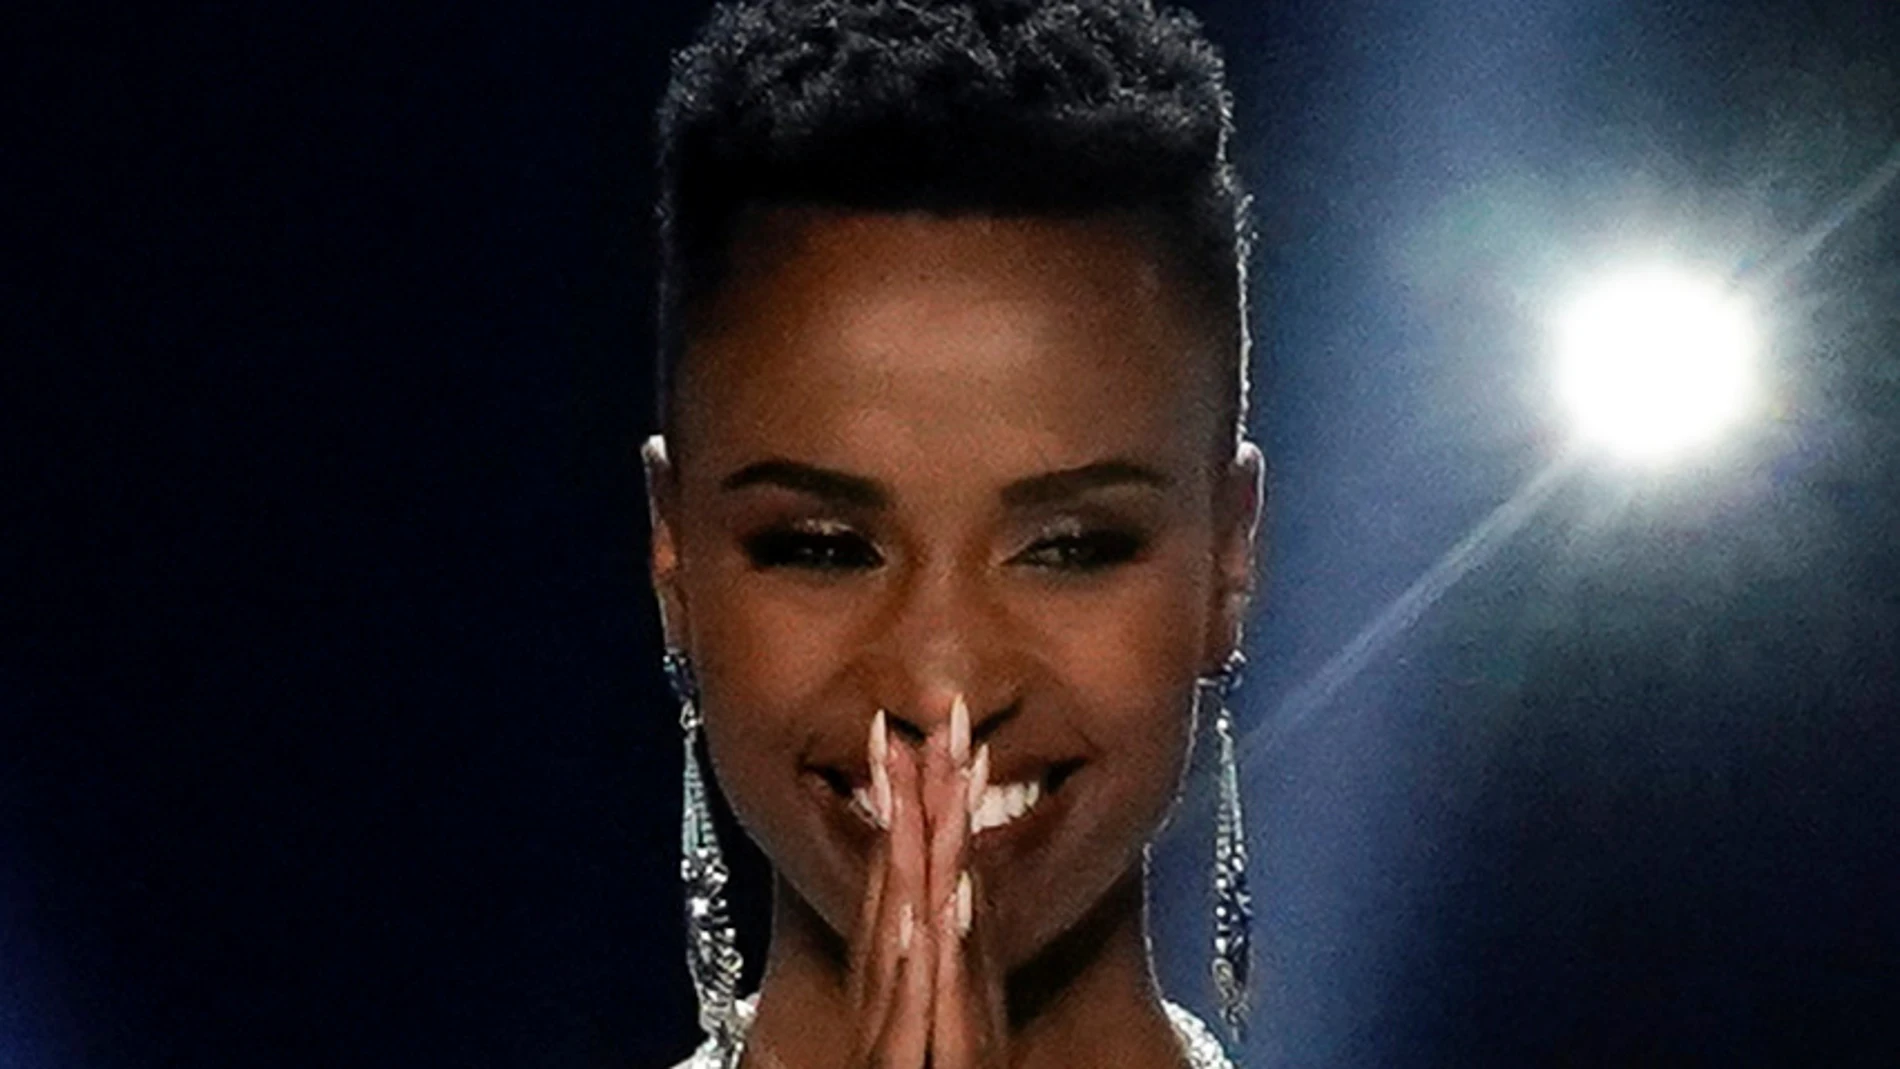 Miss Universe winner Zozibini Tunzi, of South Africa, is seen during the 2019 Miss Universe pageant at Tyler Perry Studios in Atlanta